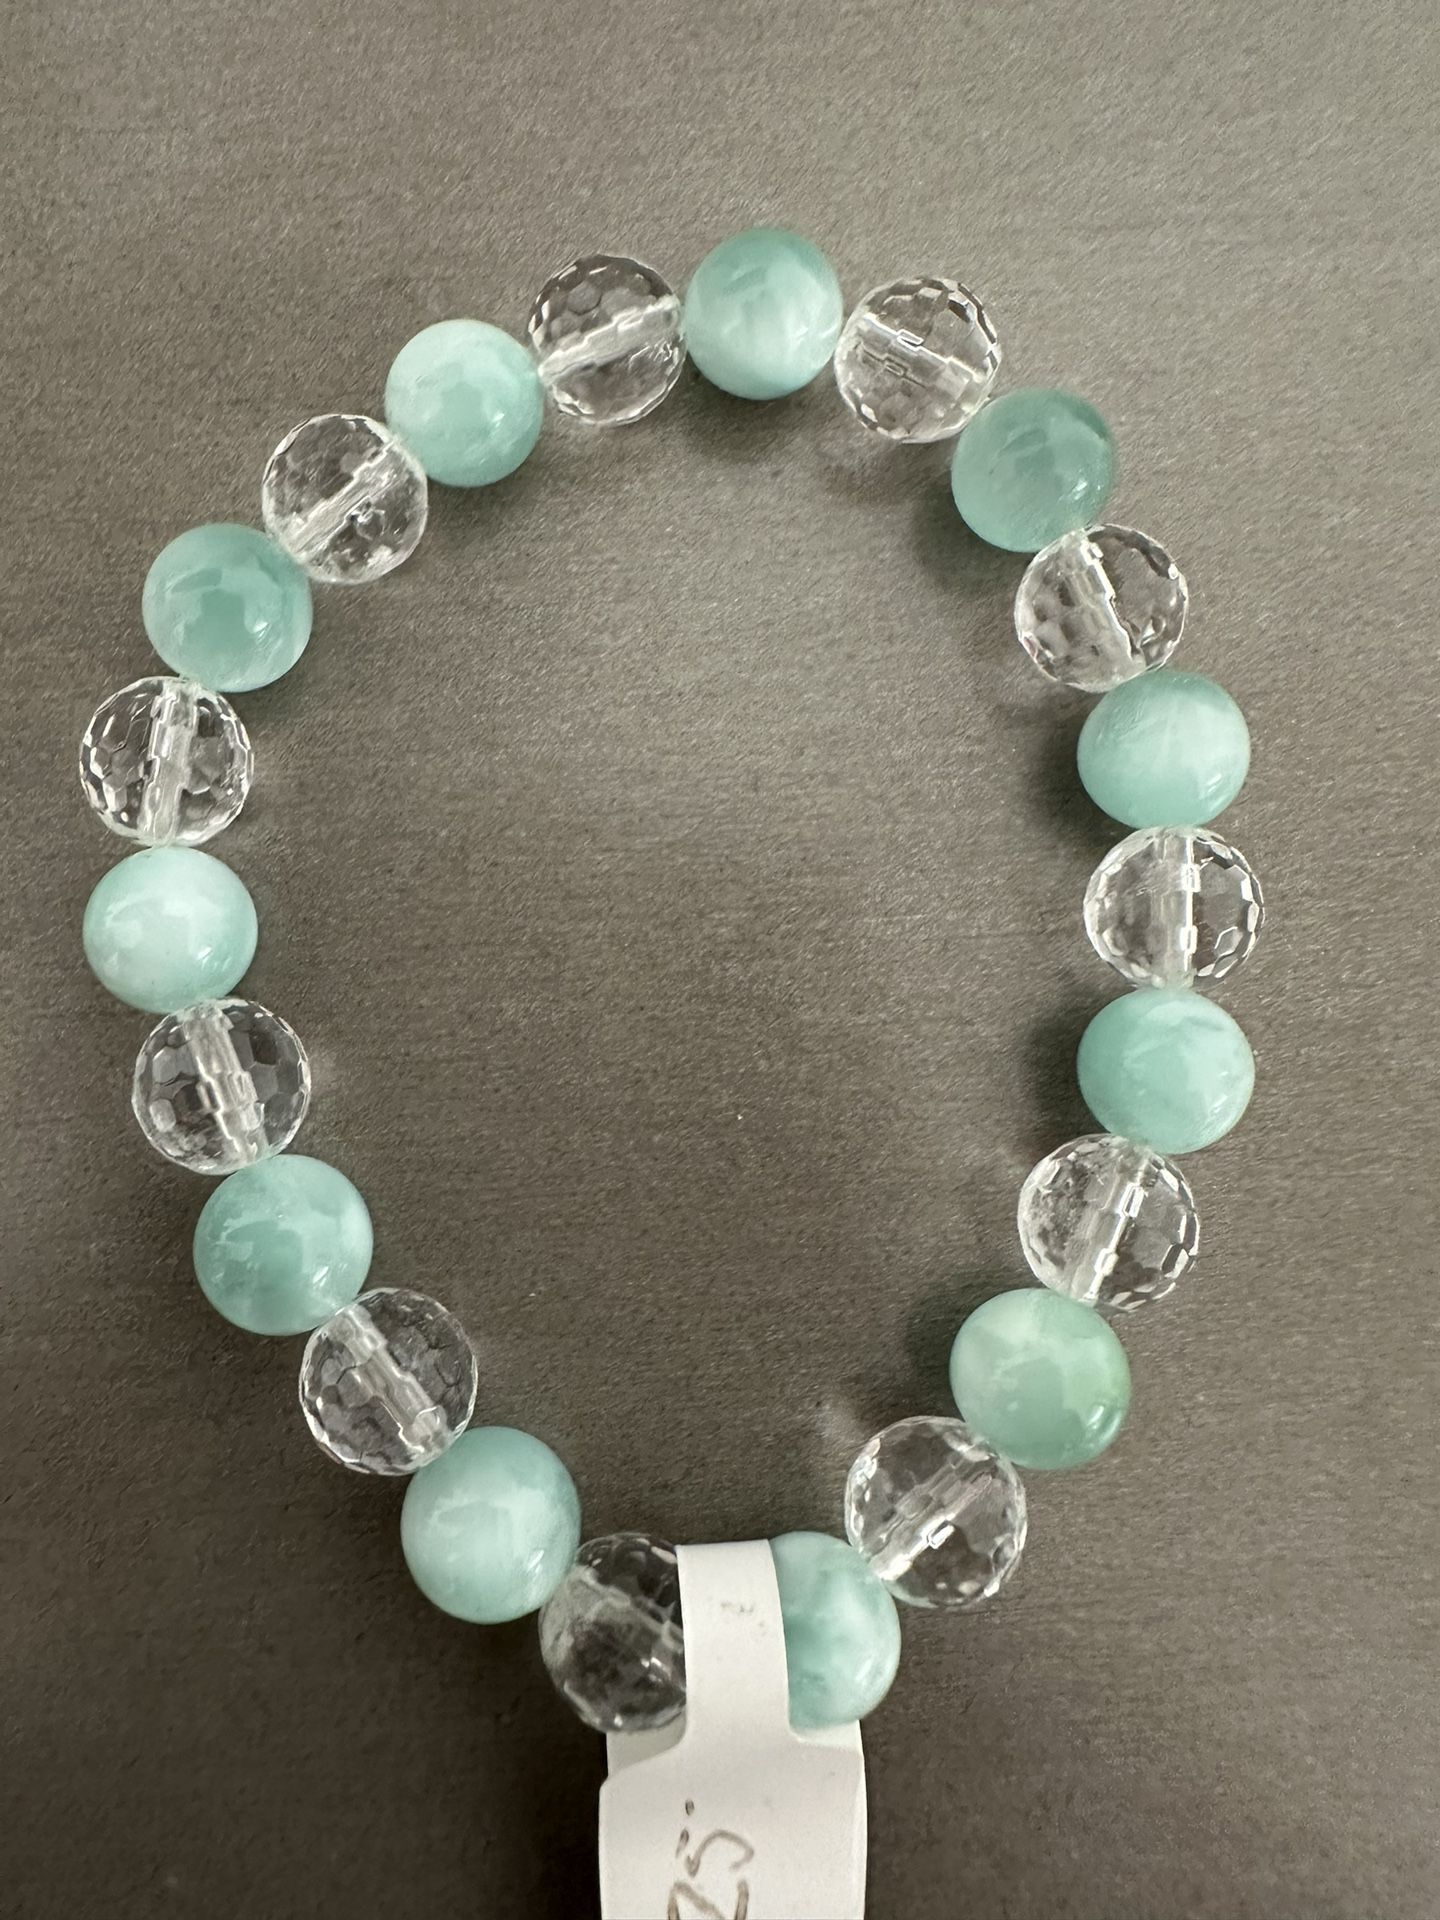 New, Beautiful Green Moonstone And Faceted Clear Quartz Crystal Bracelet. Jewelry Bag Included.